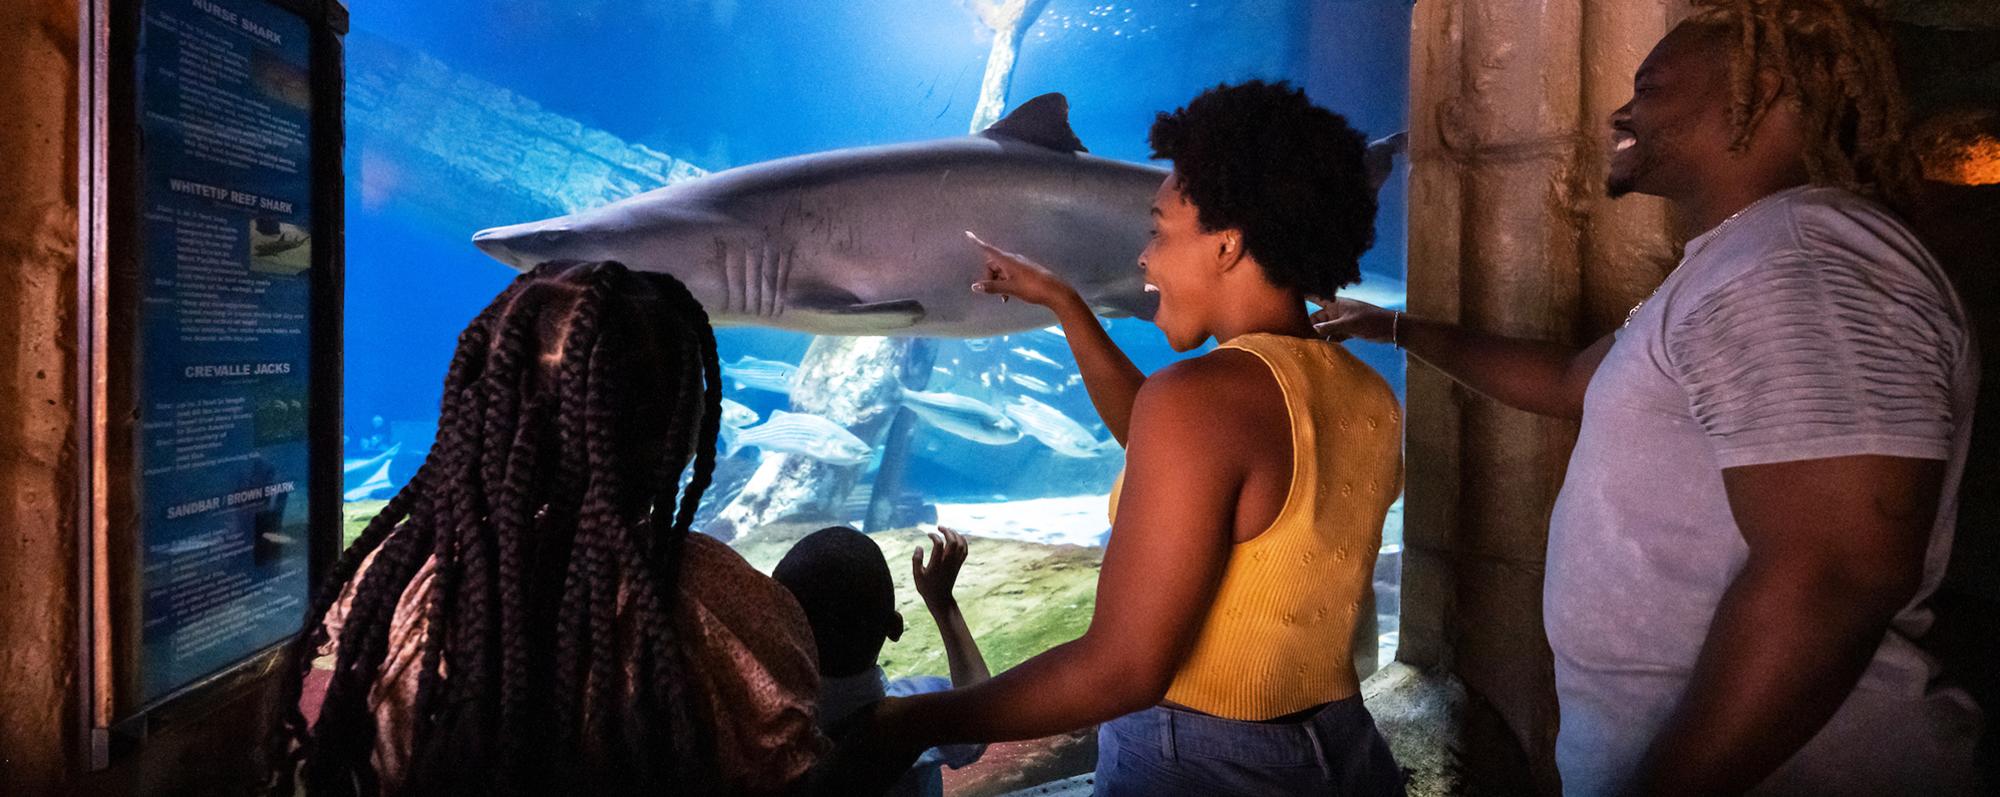 A family looks at a shark swimming in a tank at the Long Island Aquarium in Riverhead